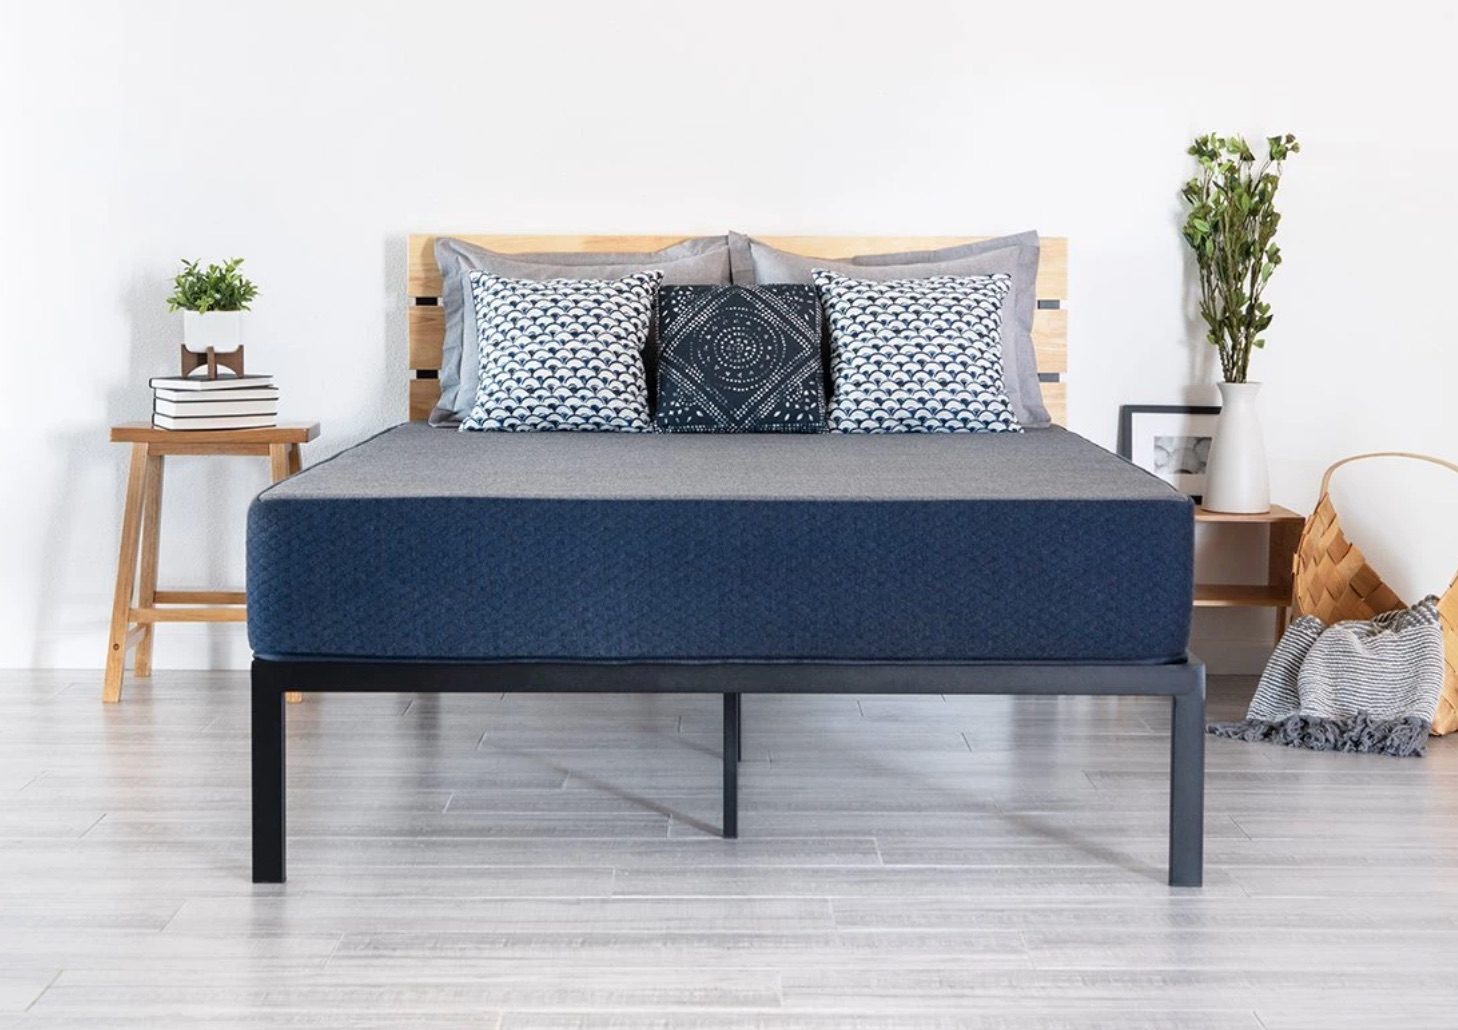 product image of the Brooklyn Bedding Chill mattress